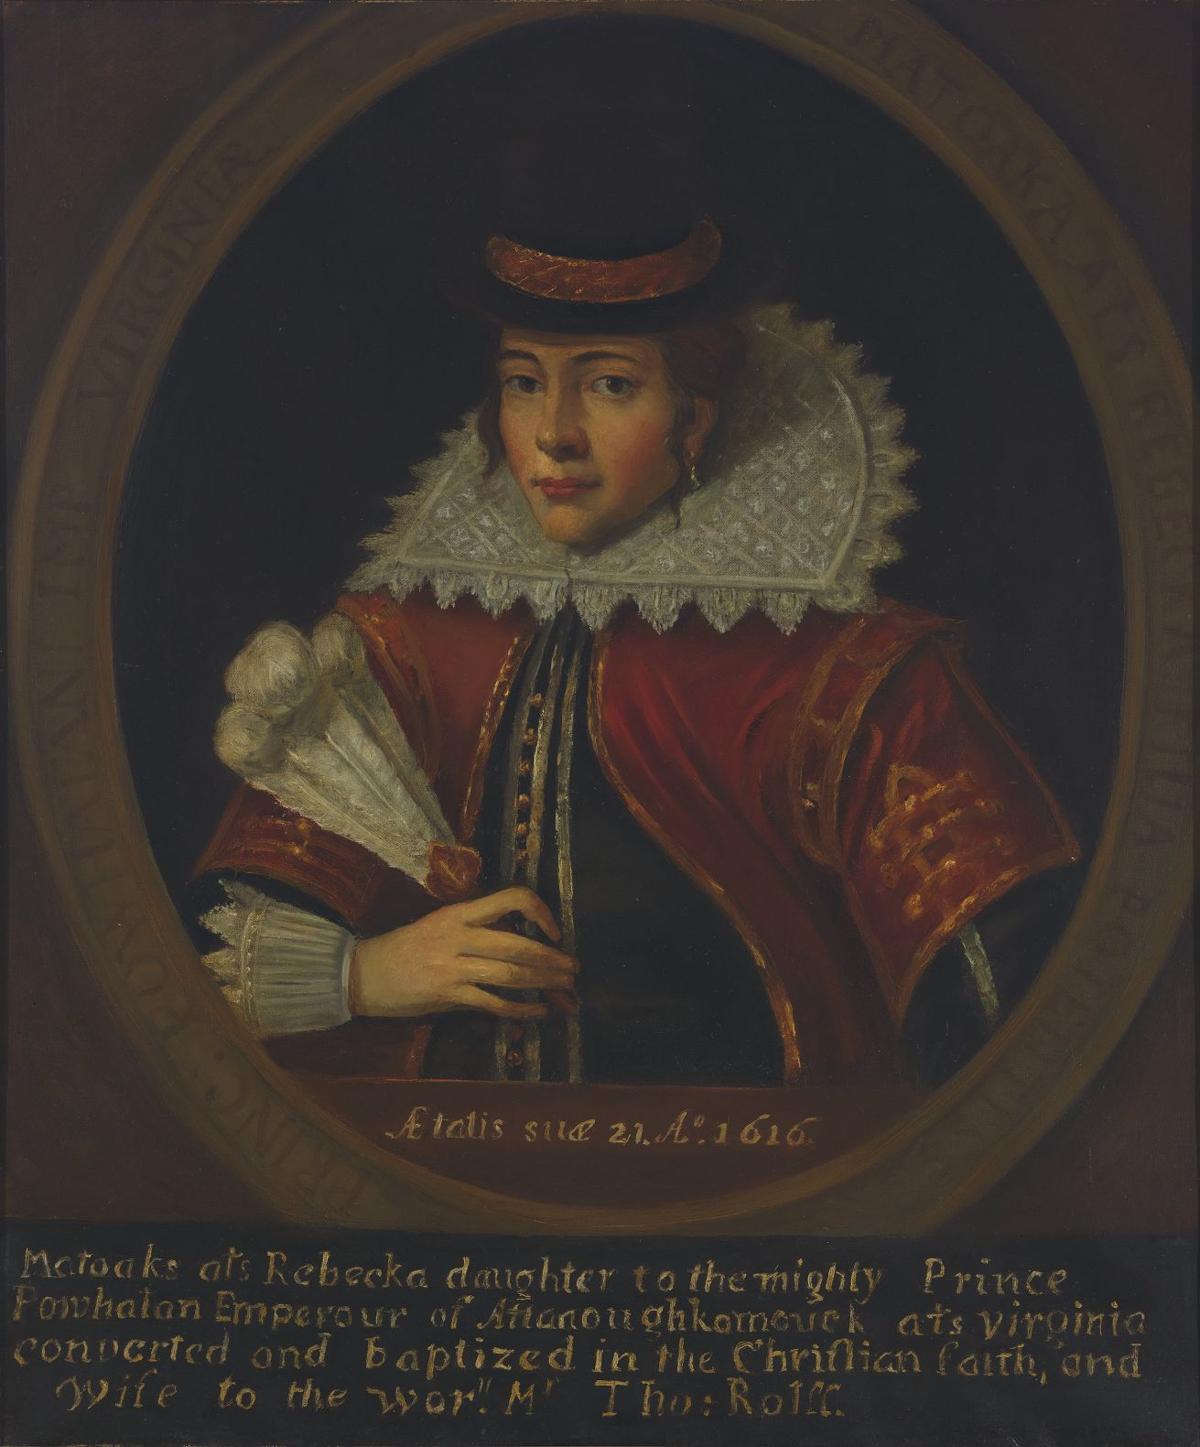 What are some facts about Pocahontas?